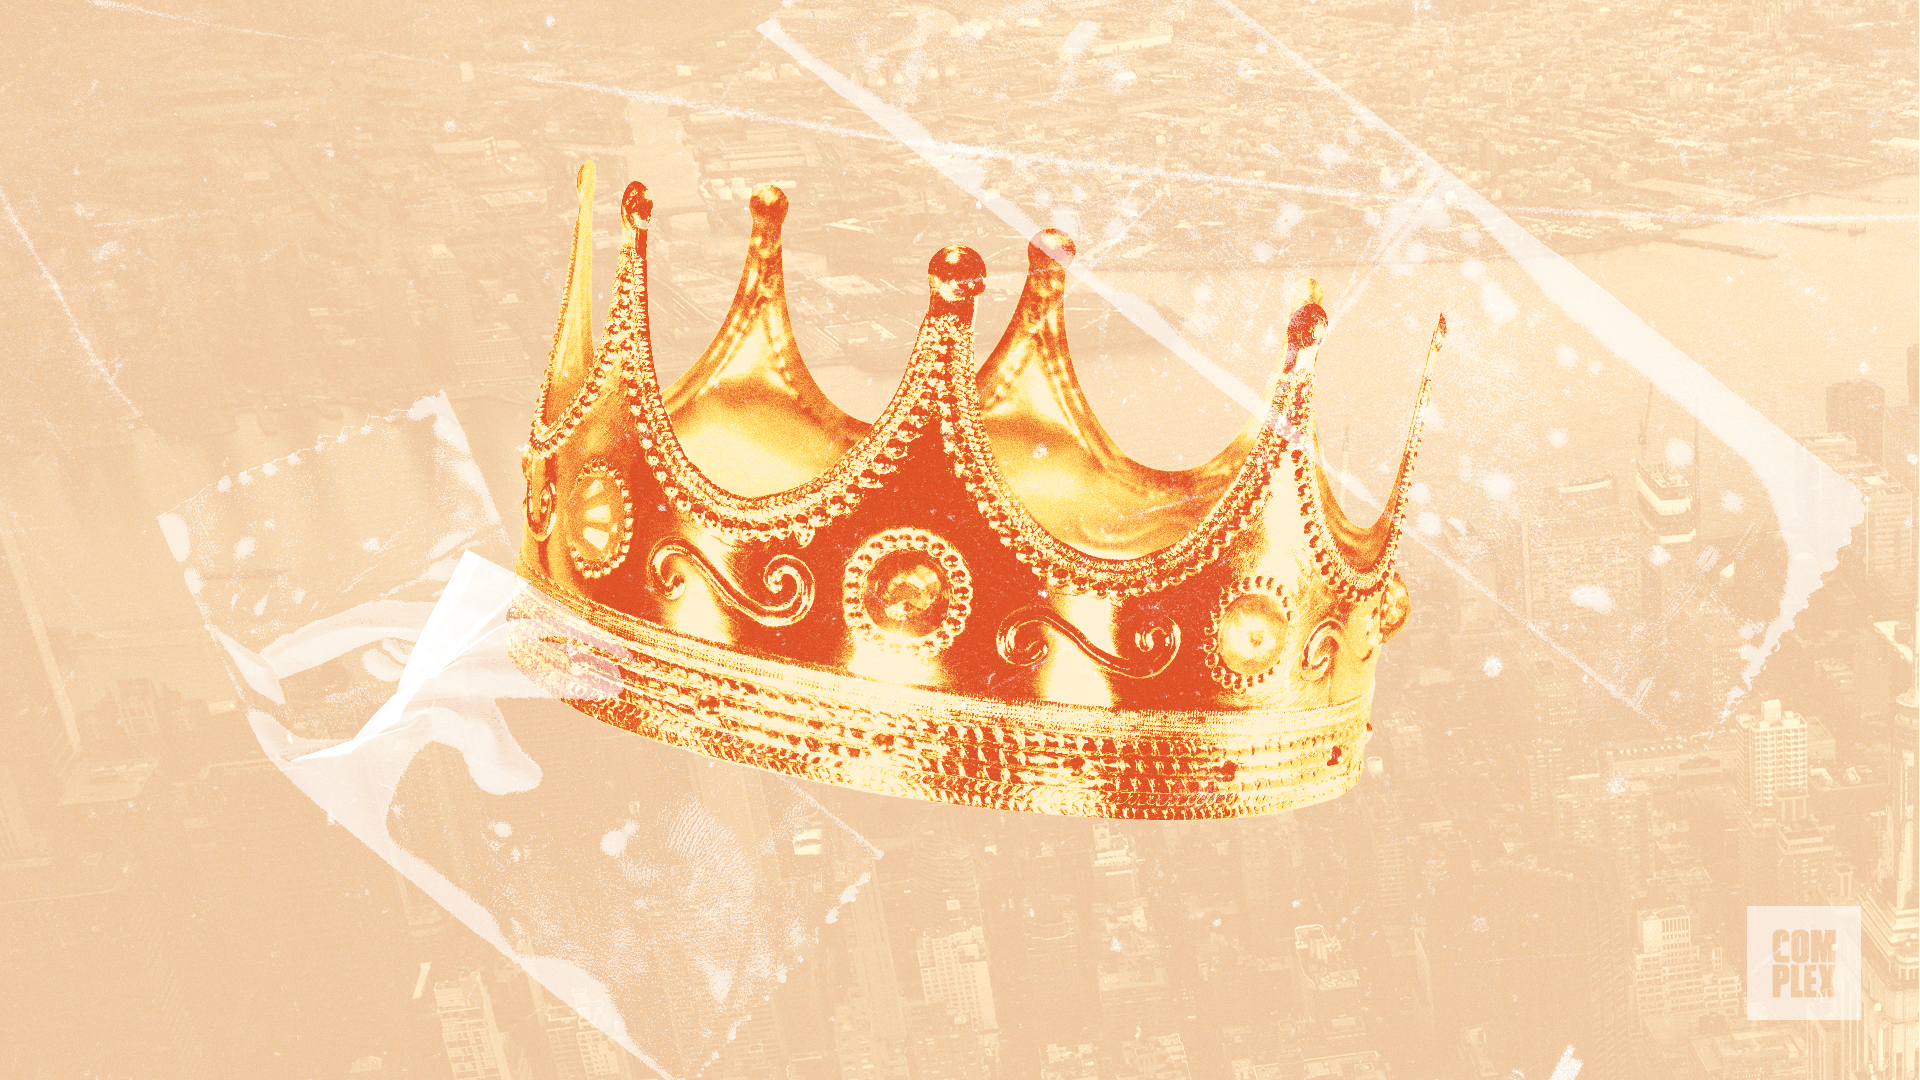 King of New York crown